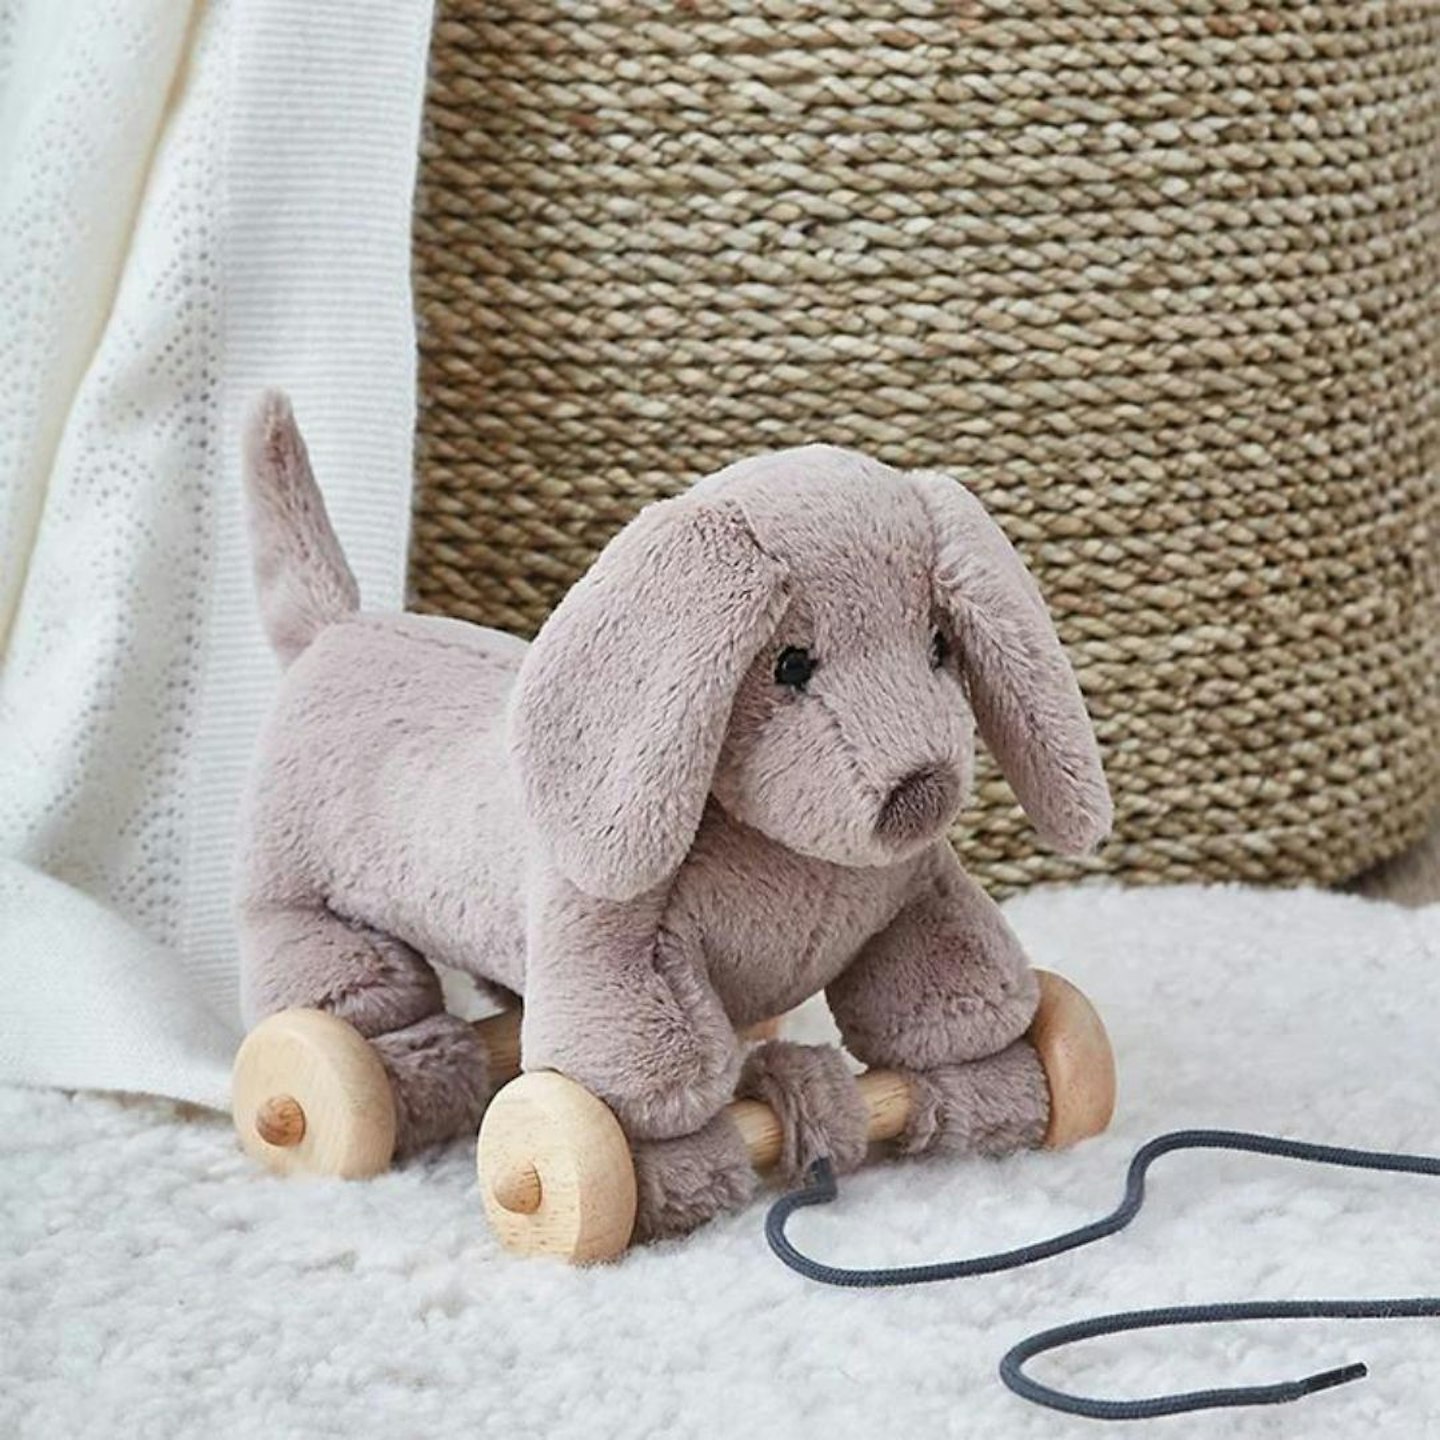 The Best Toys For One-Year-Olds: Pull Along Roland Sausage Dog Toy